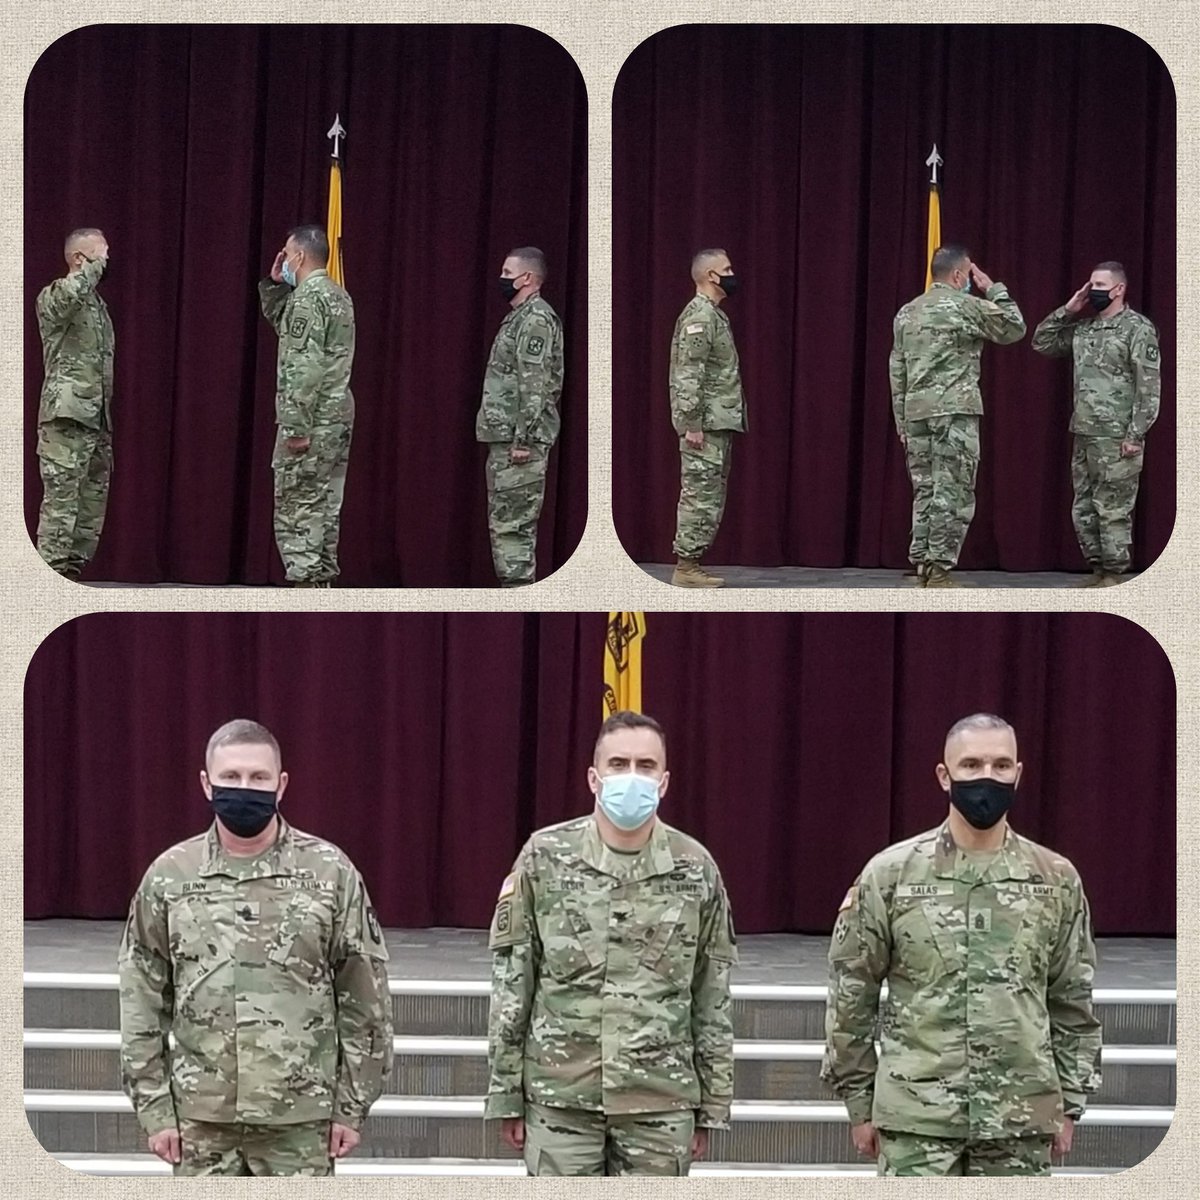 Thank you CSM Bunn for your dedication and service not only to our Cadets but our nation! CSM Salas, welcome to the team! #ArmyROTC #traintowin #leadershipexcellence @ArmyROTC @USArmy @AUSAorg @TRADOC